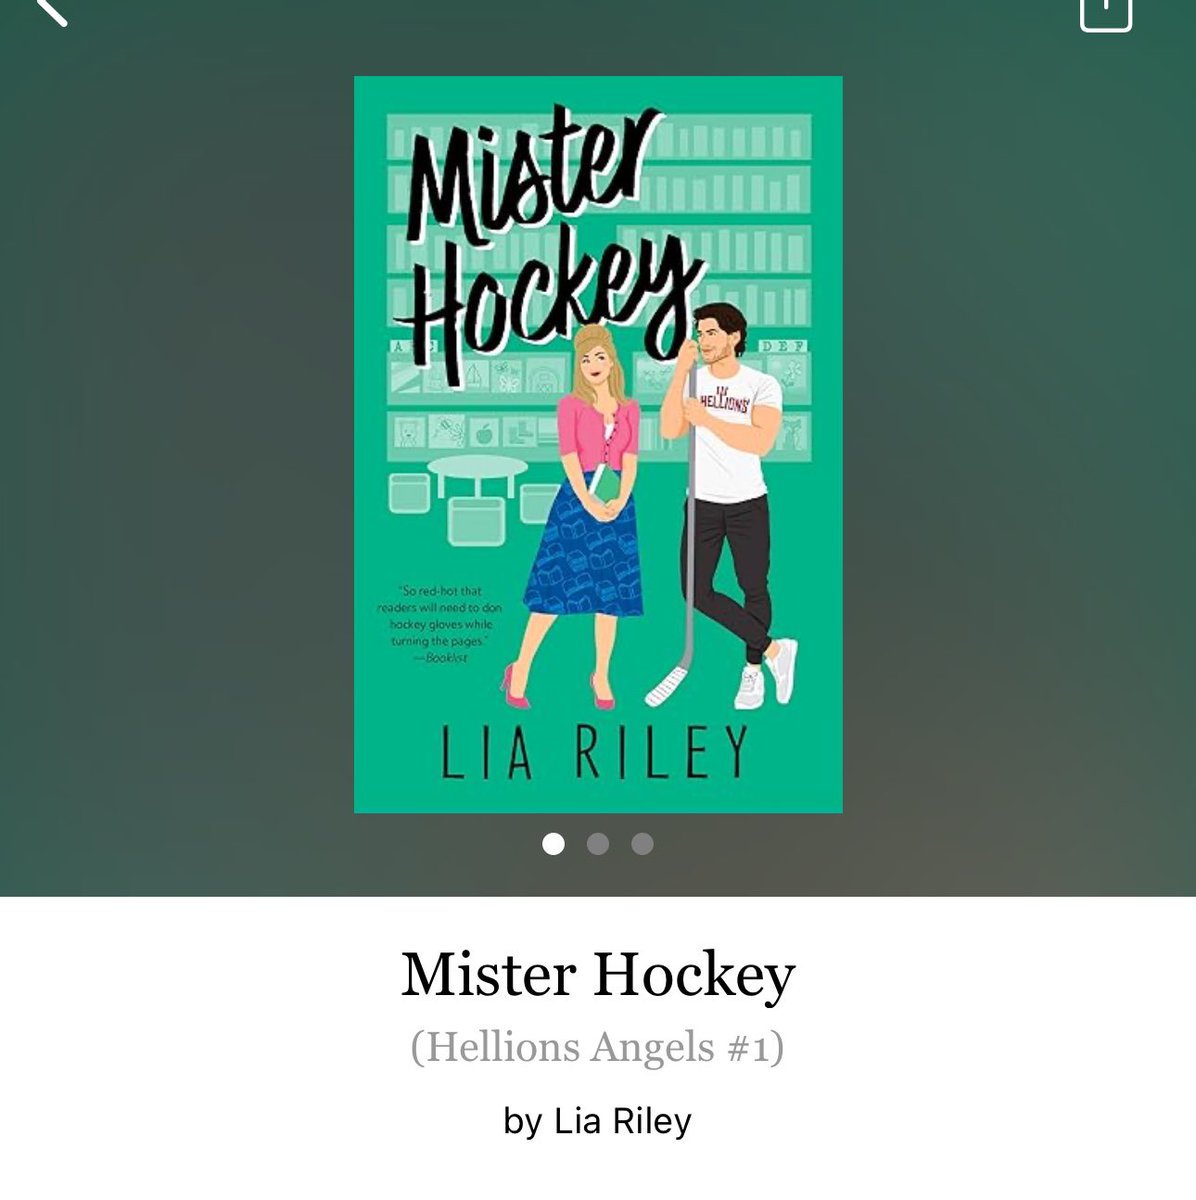 Mister Hockey by Lia Riley 

#MisterHockey by #LiaRiley #6278 #21chapters #208pages #427of400 #Series #Audiobook #64for16 #Book1of3 #HellionsAngelsSeries #april2024 #clearingoffreadingshelves #whatsnext #readitquick